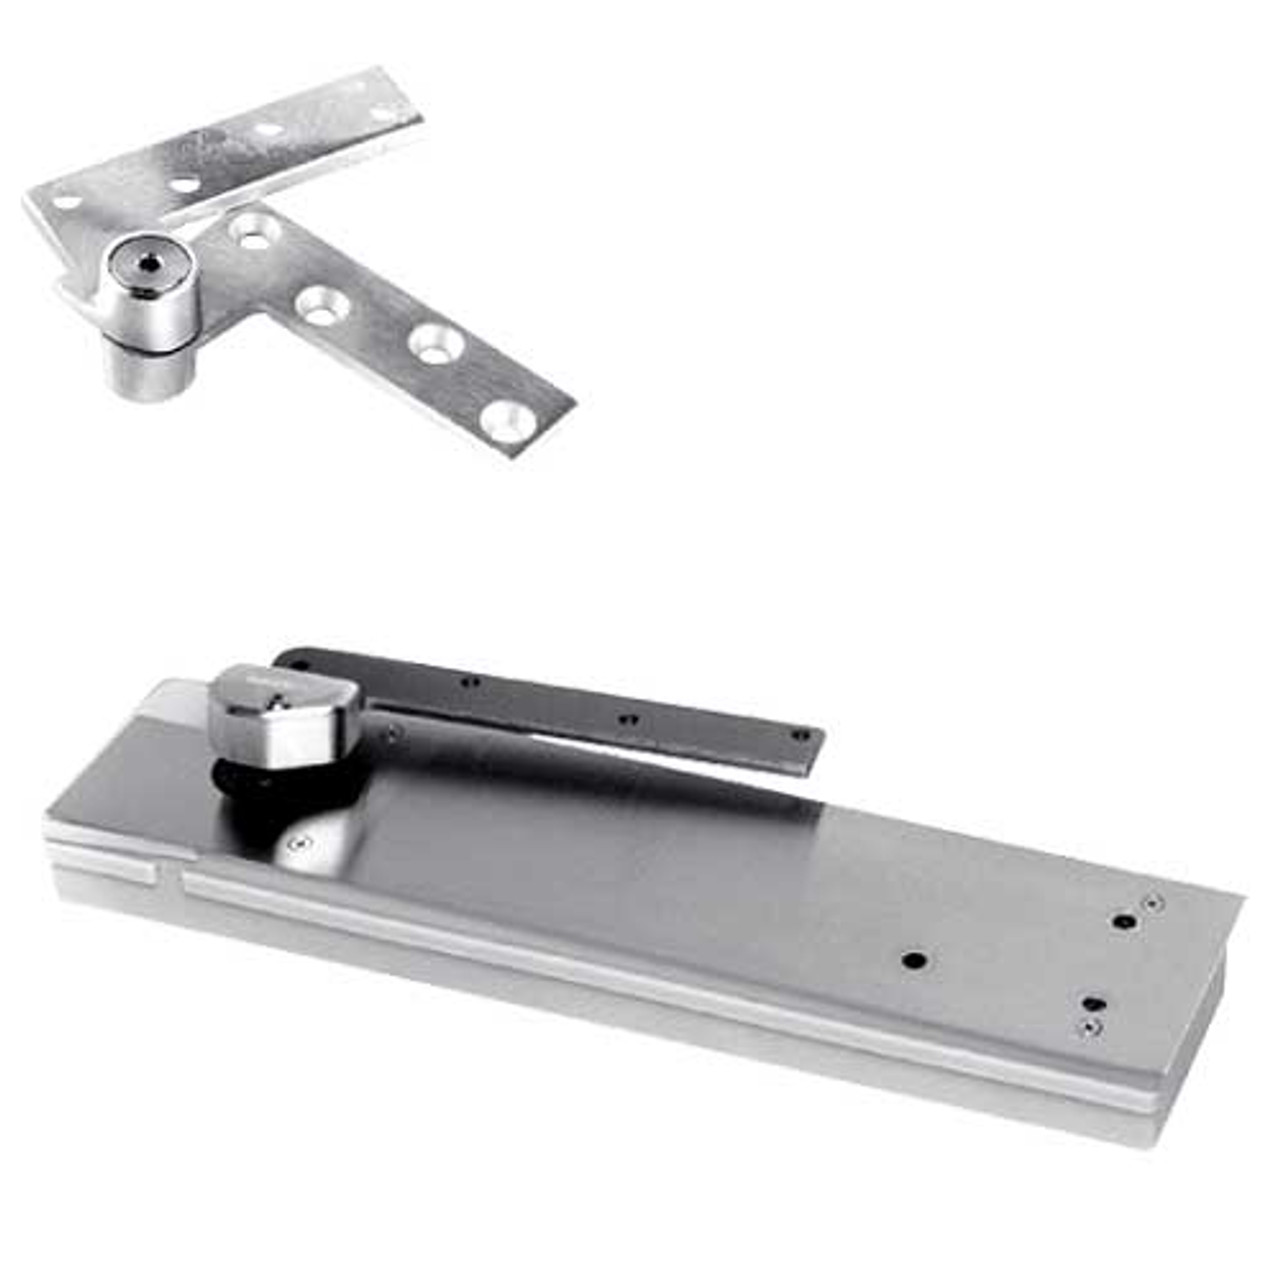 5103ABC105-1-1/2OS-RH-625 Rixson 51 Series 1-1/2" Offset Hung Shallow Depth Floor Closers in Bright Chrome Finish